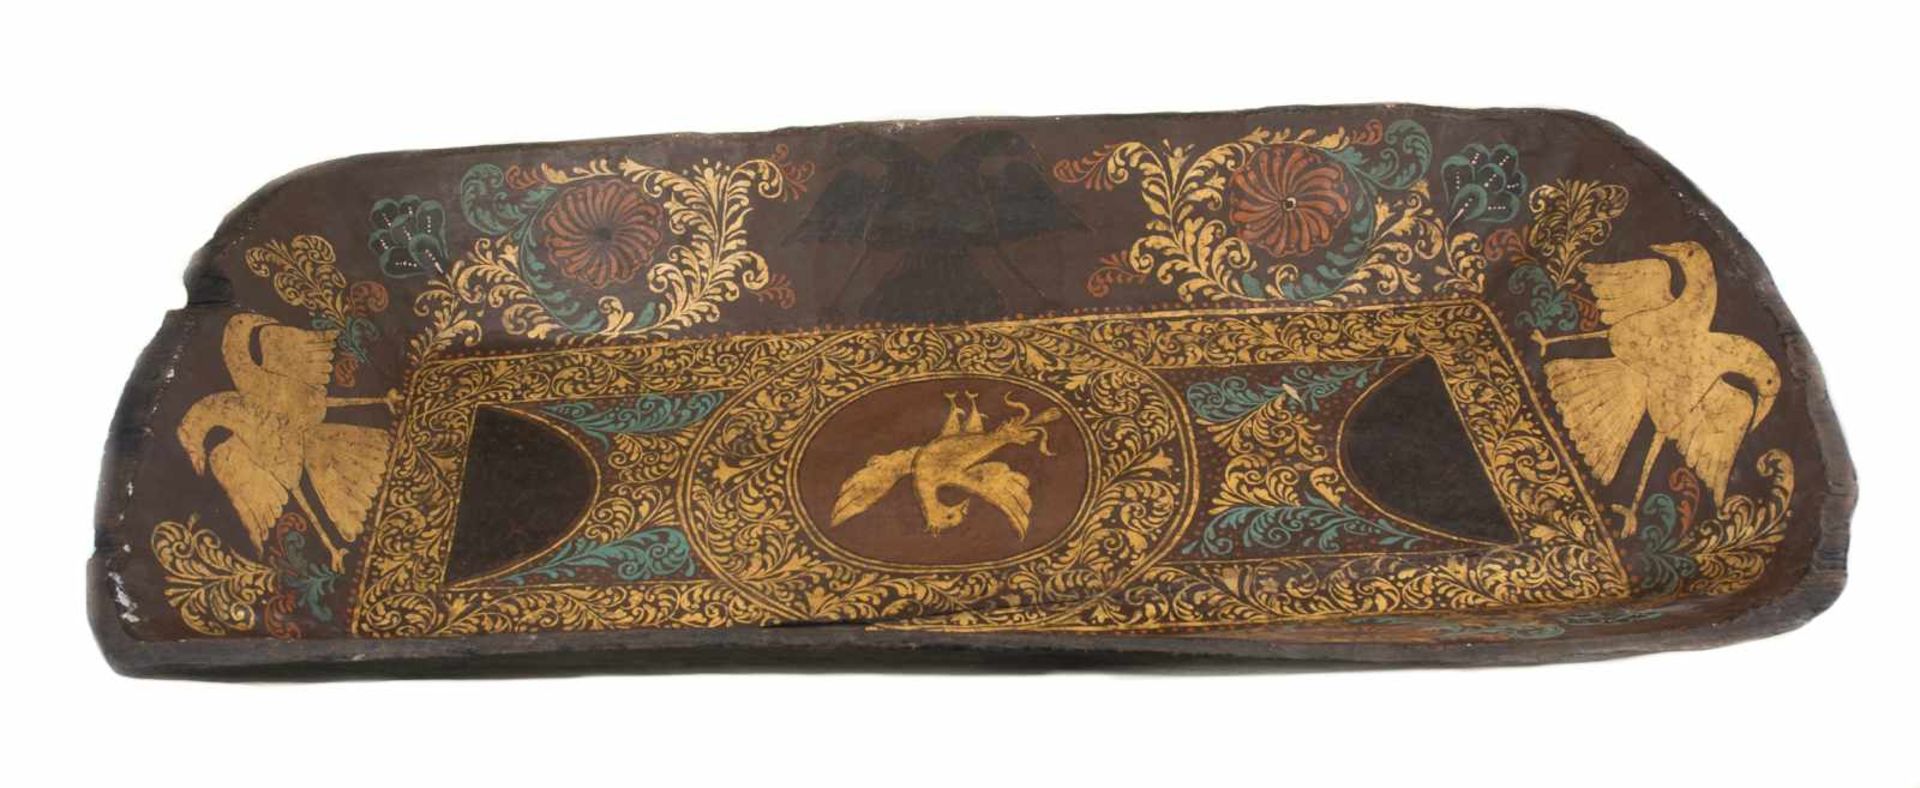 Larged lacquered wooden tray. Michoacan. Mexico. 18th century.Rich decoration depicting two-headed - Image 6 of 6